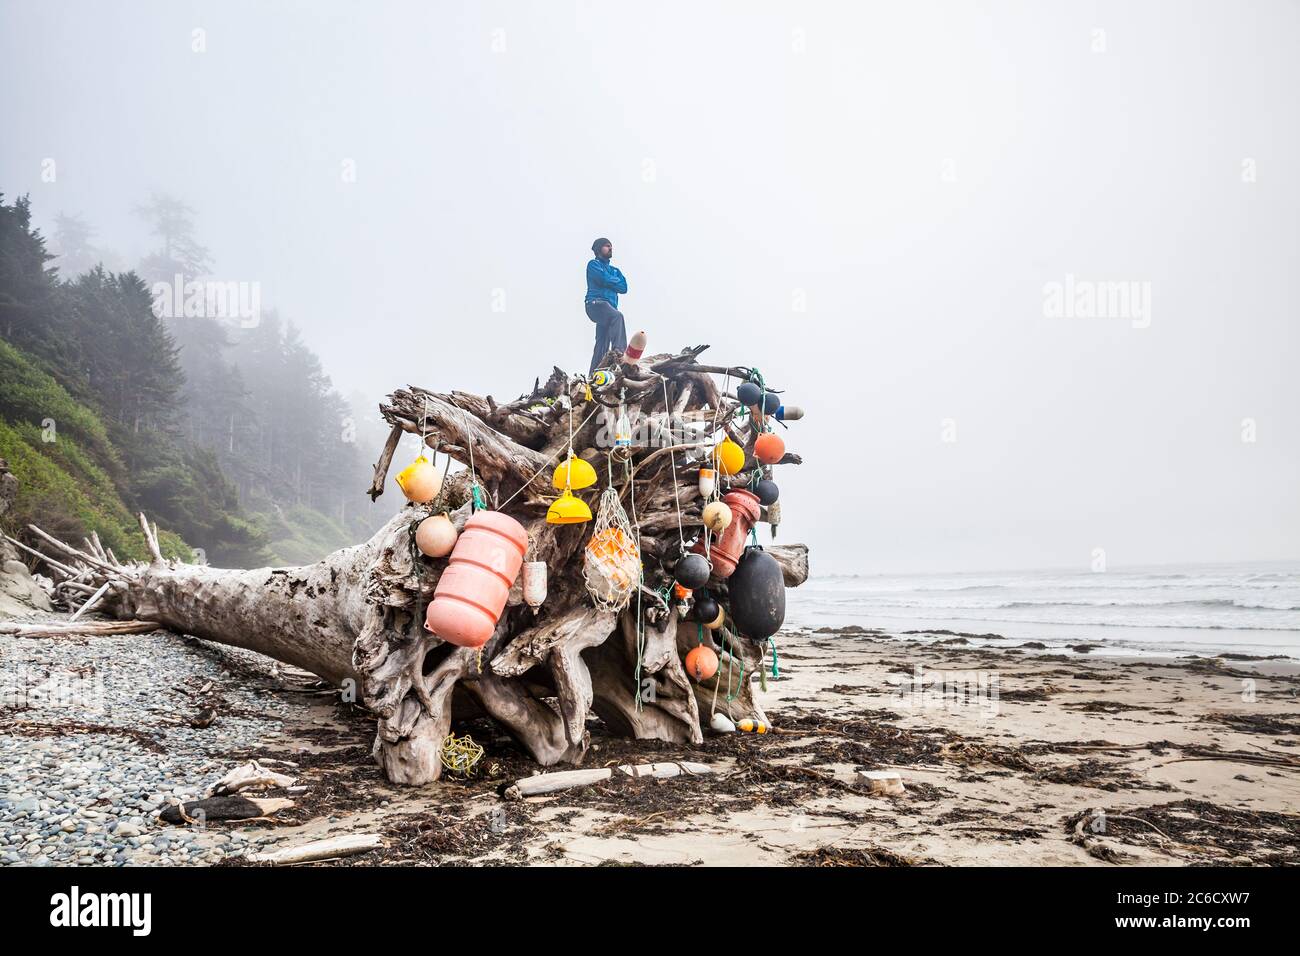 A man stands atop a giant driftwood tree root ball decorated with washed up buoys on the Washington Coast, Olympic National Park Coastal Strip. Stock Photo